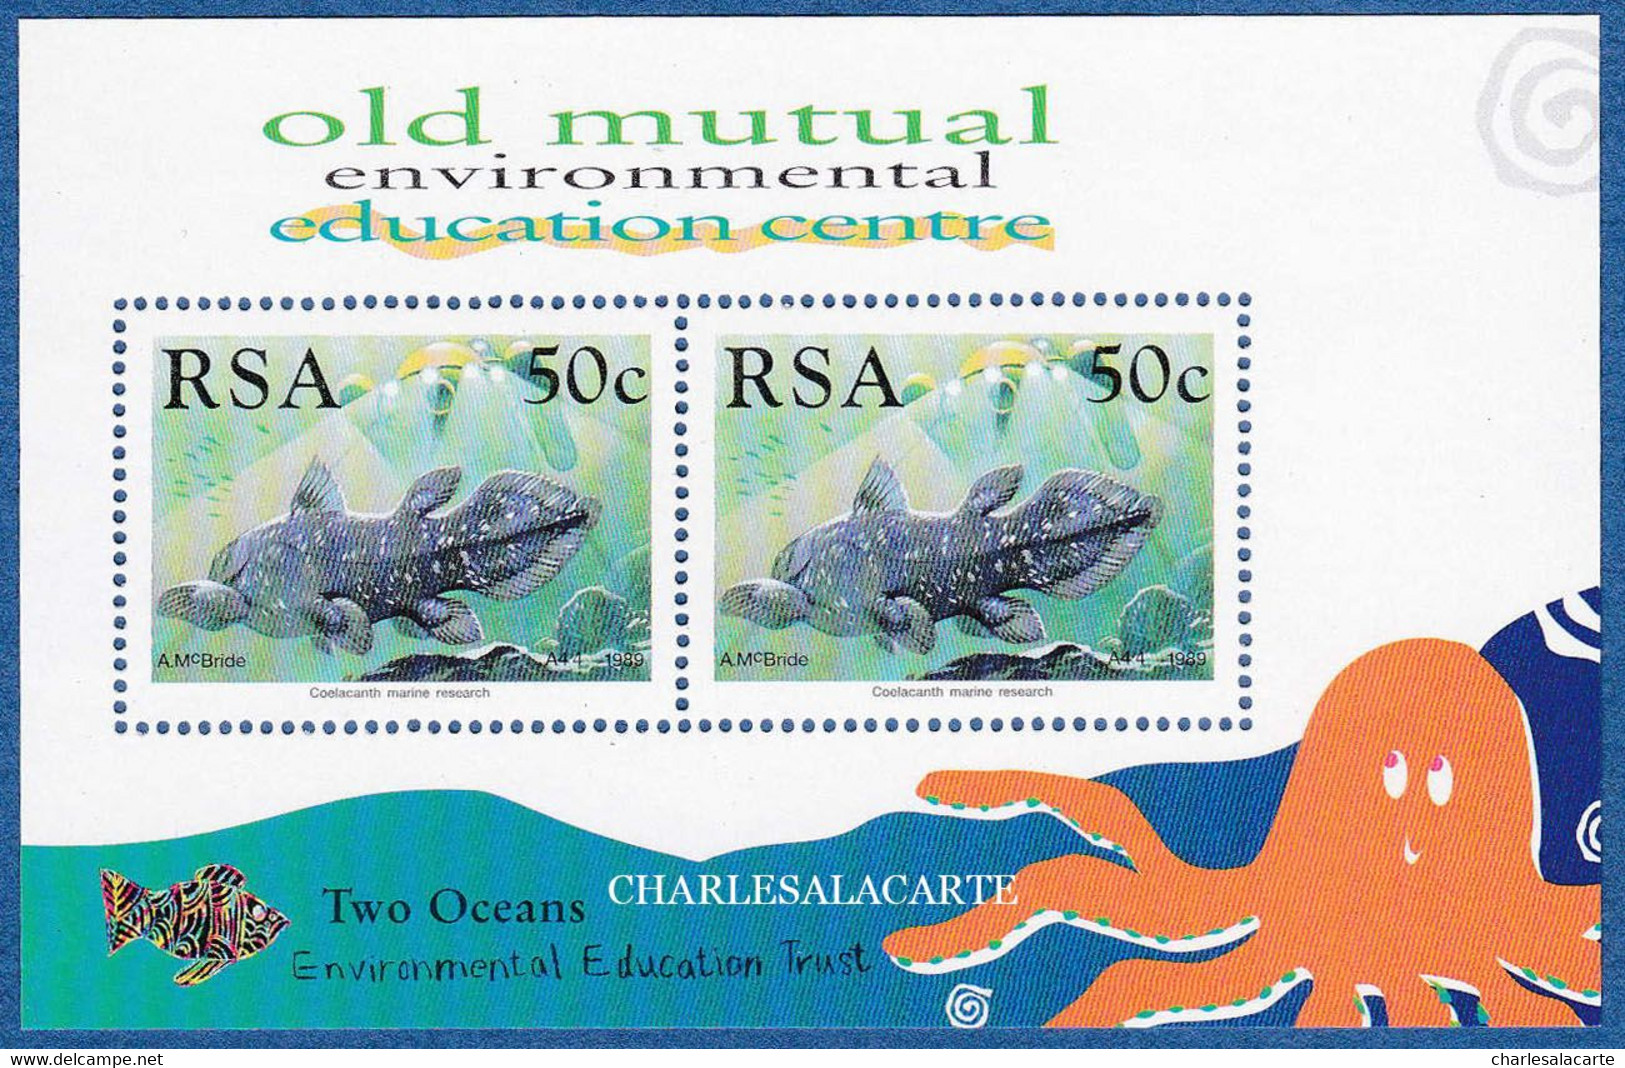 SOUTH AFRICA  1989  COELACANTH DISCOVERY M.S. OLD MUTUEL  S.G. 680 (2) M.S.  U.M. - Blokken & Velletjes